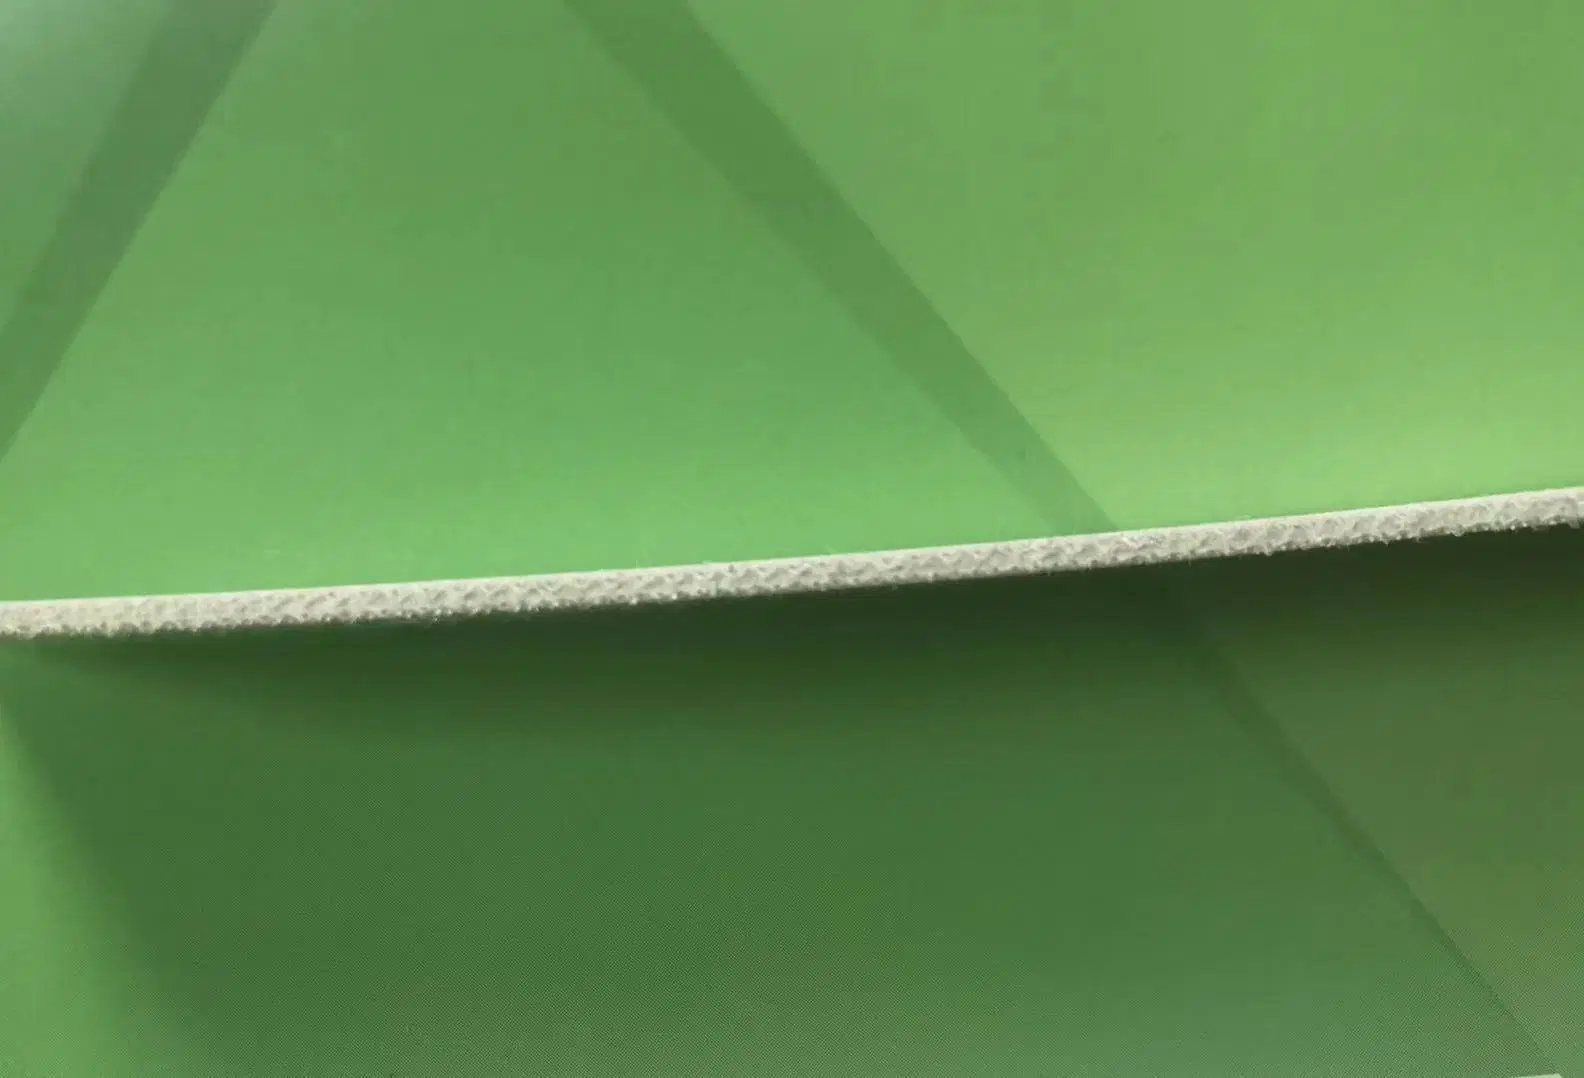 Silicone Conveyor Belt for Tire, Food, Bakery, Packing Machines, Heat Resistant Silicone Conveyor Belt for Bakery, Packing Machines, FDA, Oil-Resistance